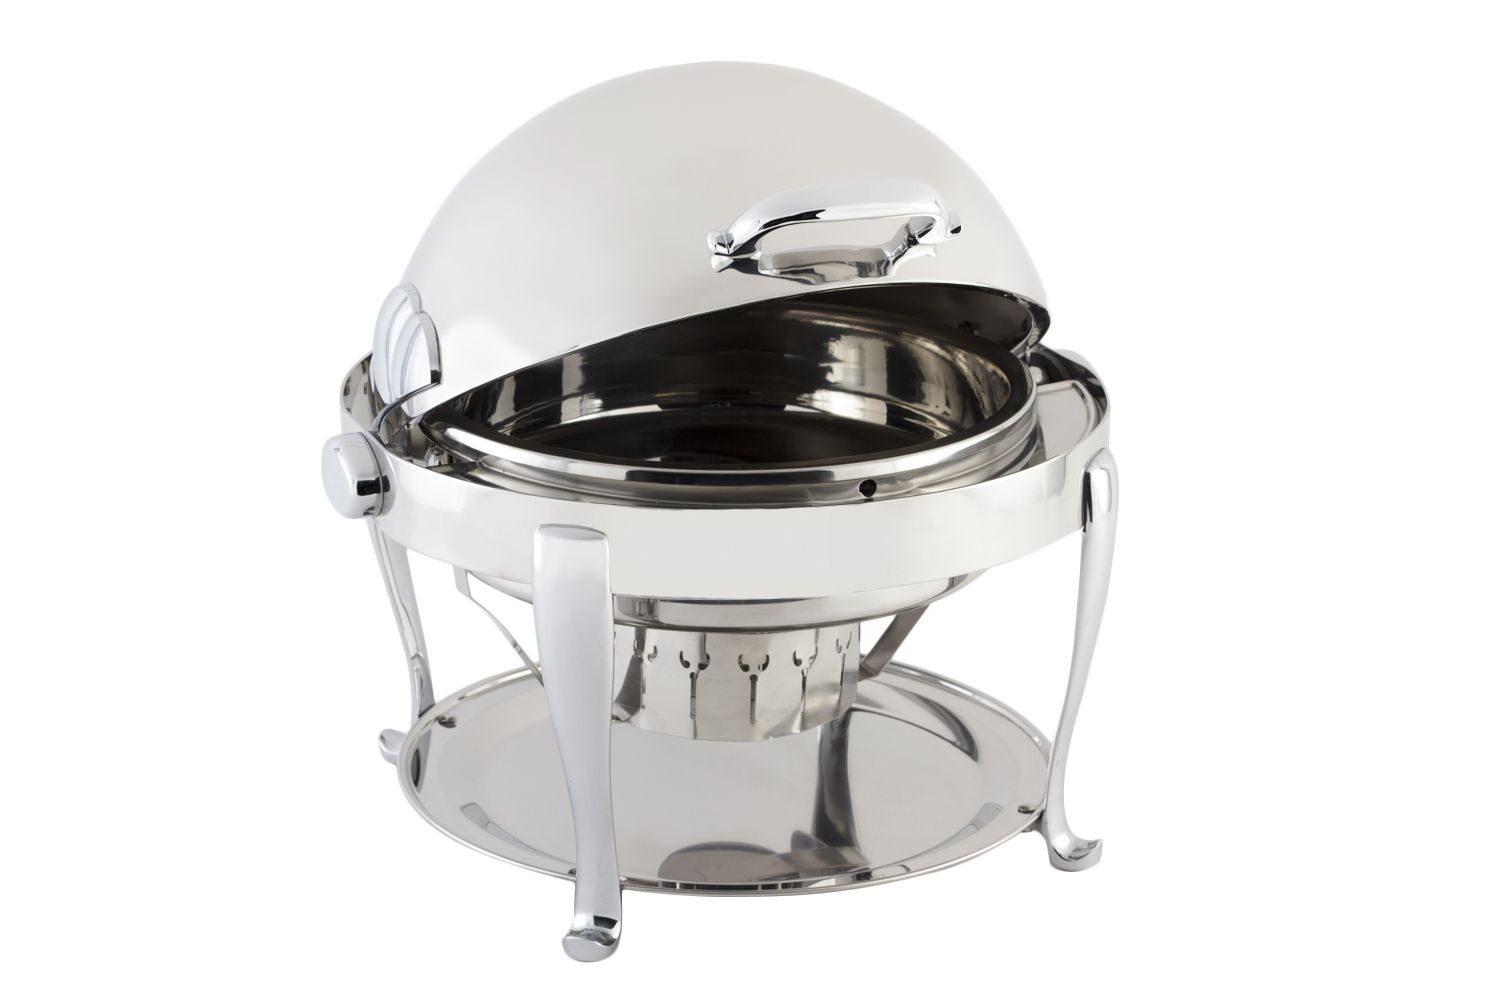 Bon Chef 19000CH Elite Dripless Round Chafer with Chrome Accents, Roman Legs, 8 Qt.